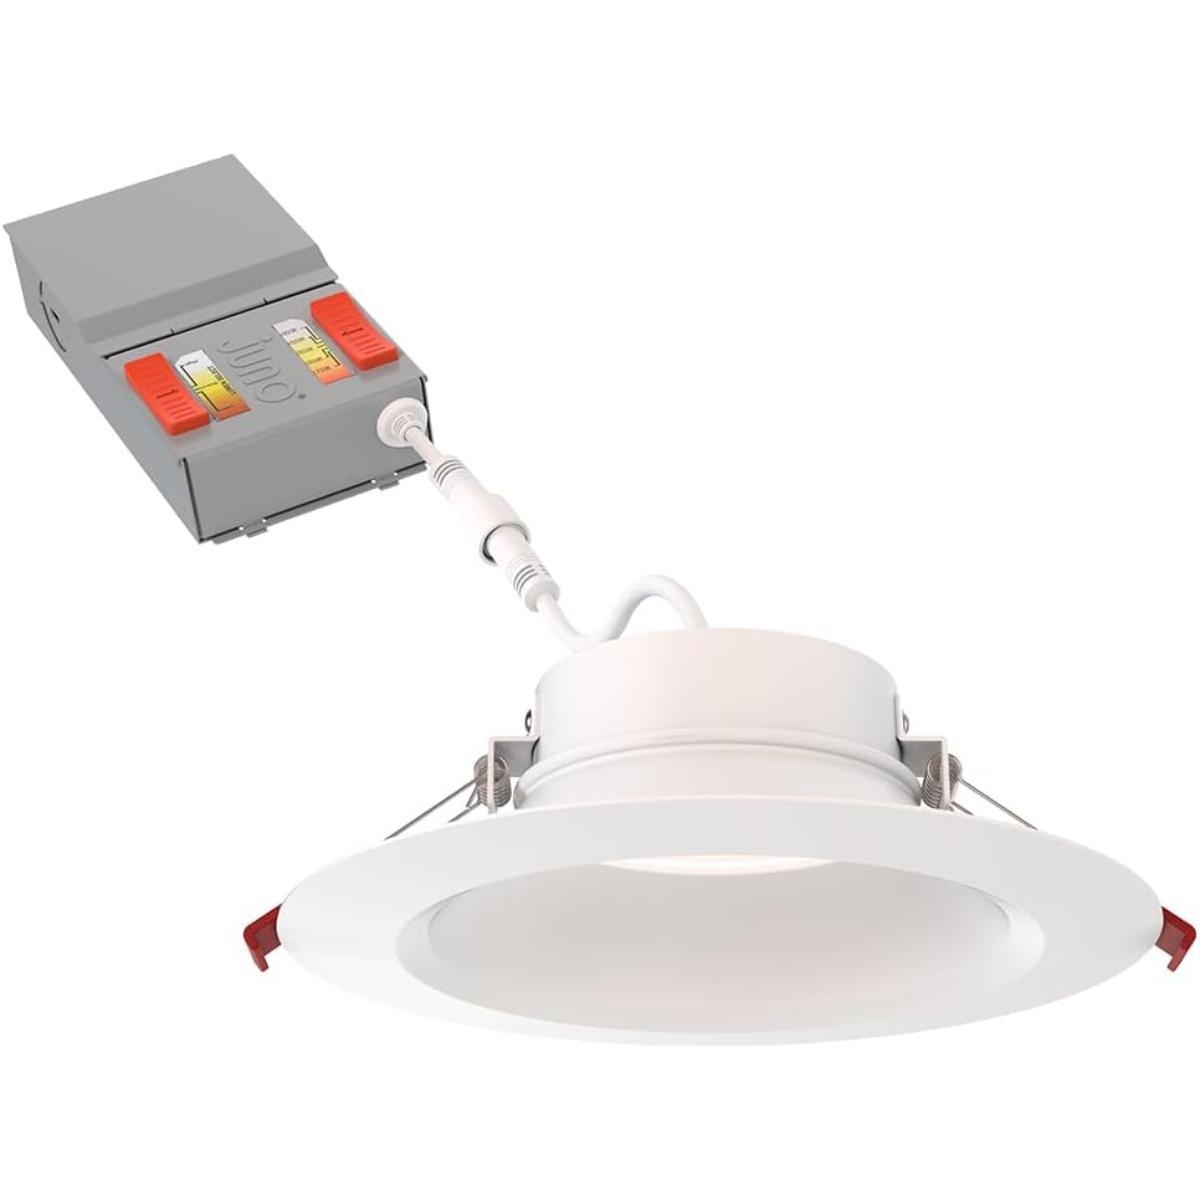 6 inch Wafer Canless LED Recessed Light, 16 Watt, 1300 Lumens, Selectable CCT, 2700K to 5000K, Smooth Trim - Bees Lighting